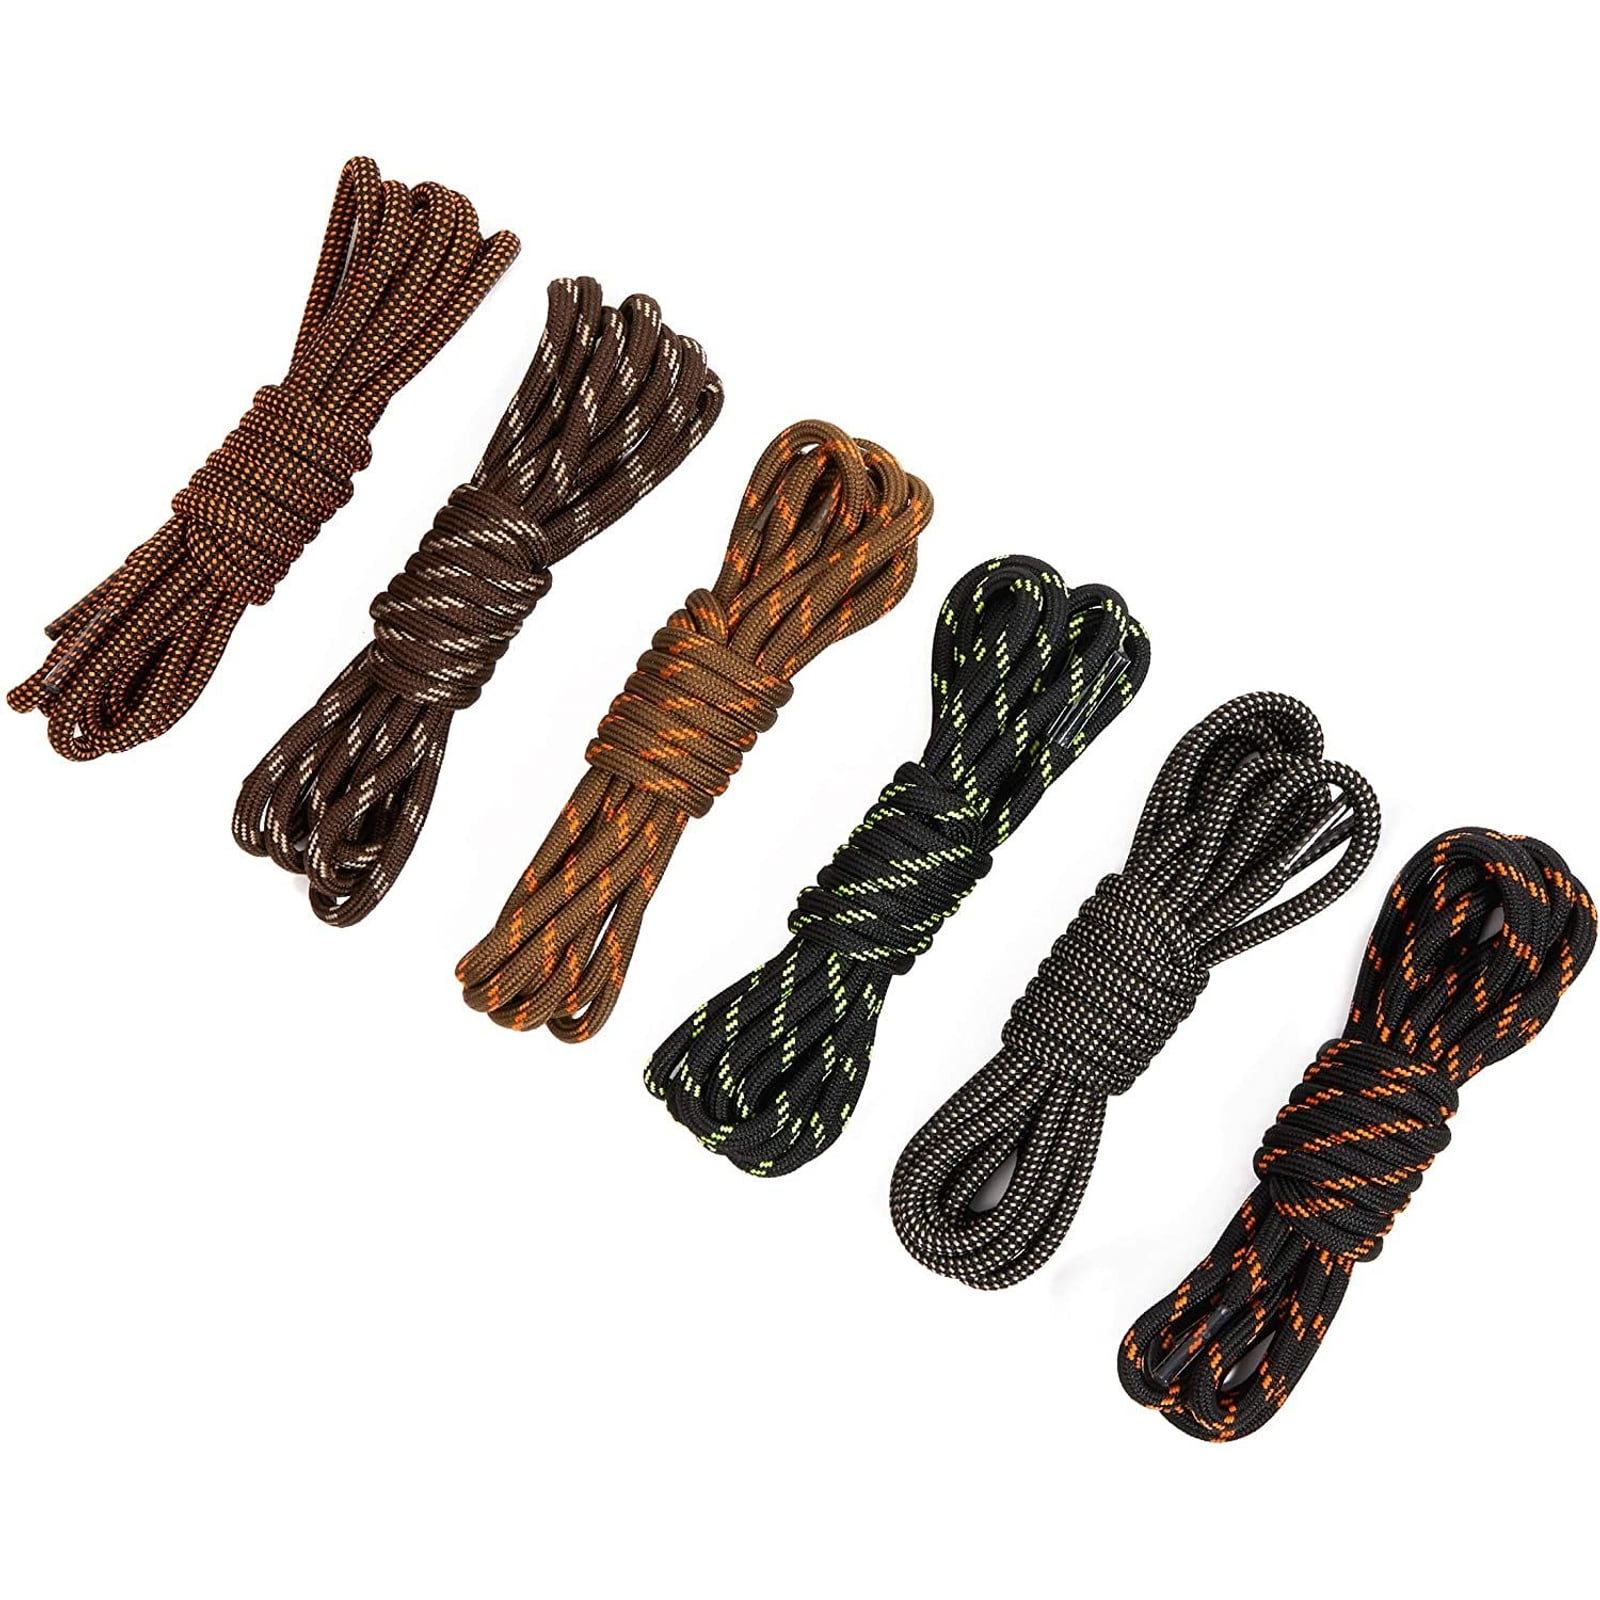 Round Shoelace Shoelaces Shoe Lace for Athletic Sport Hiking Work Boots Sneakers 